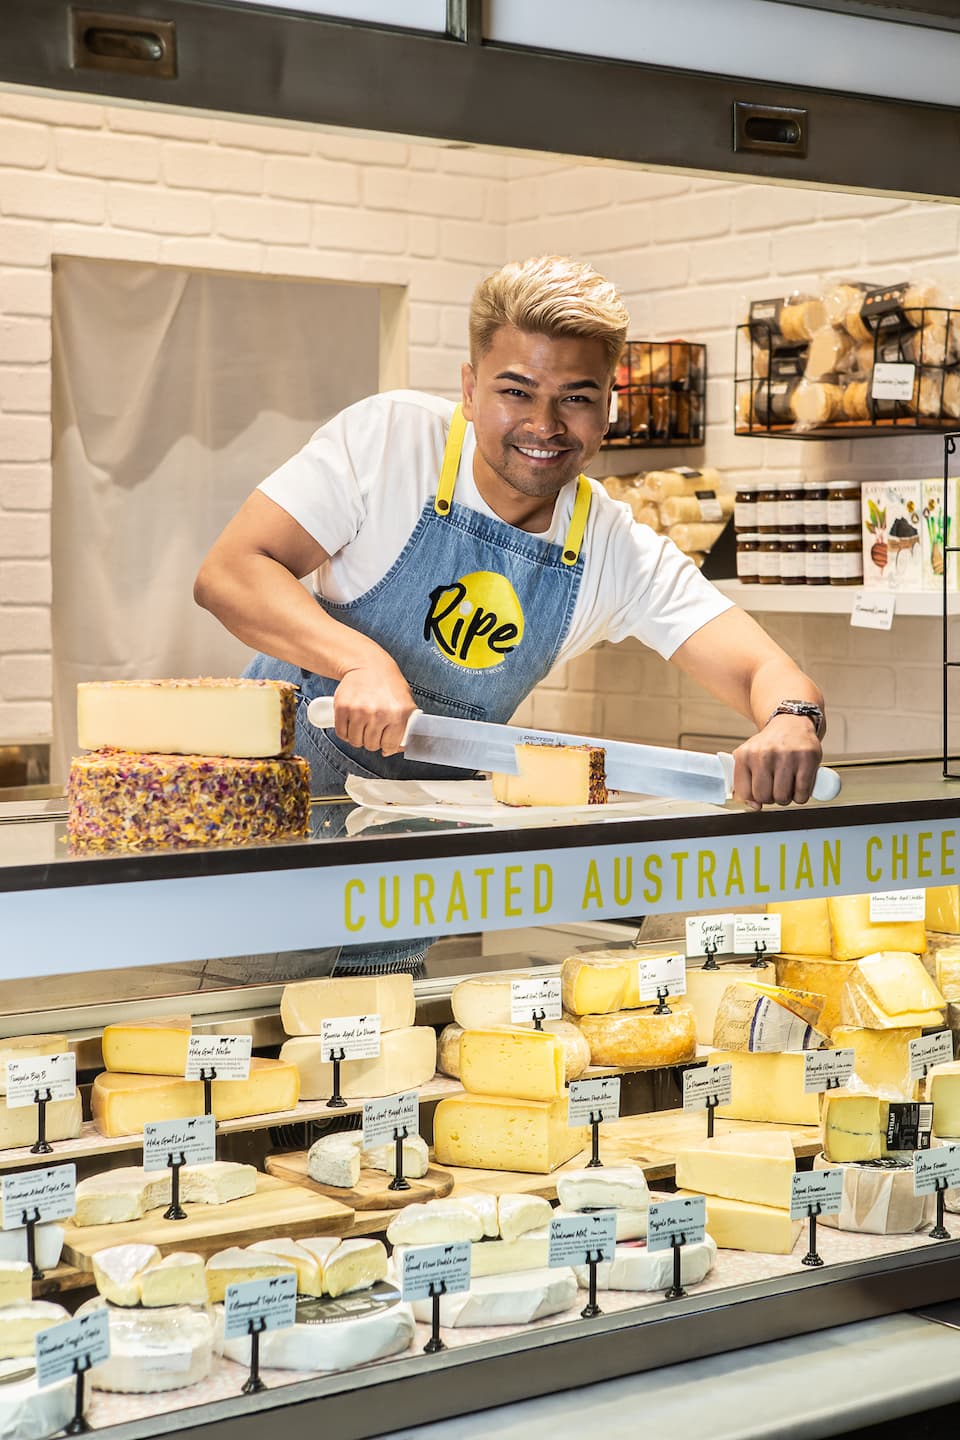 Hakim Halim slicing cheese on the counter